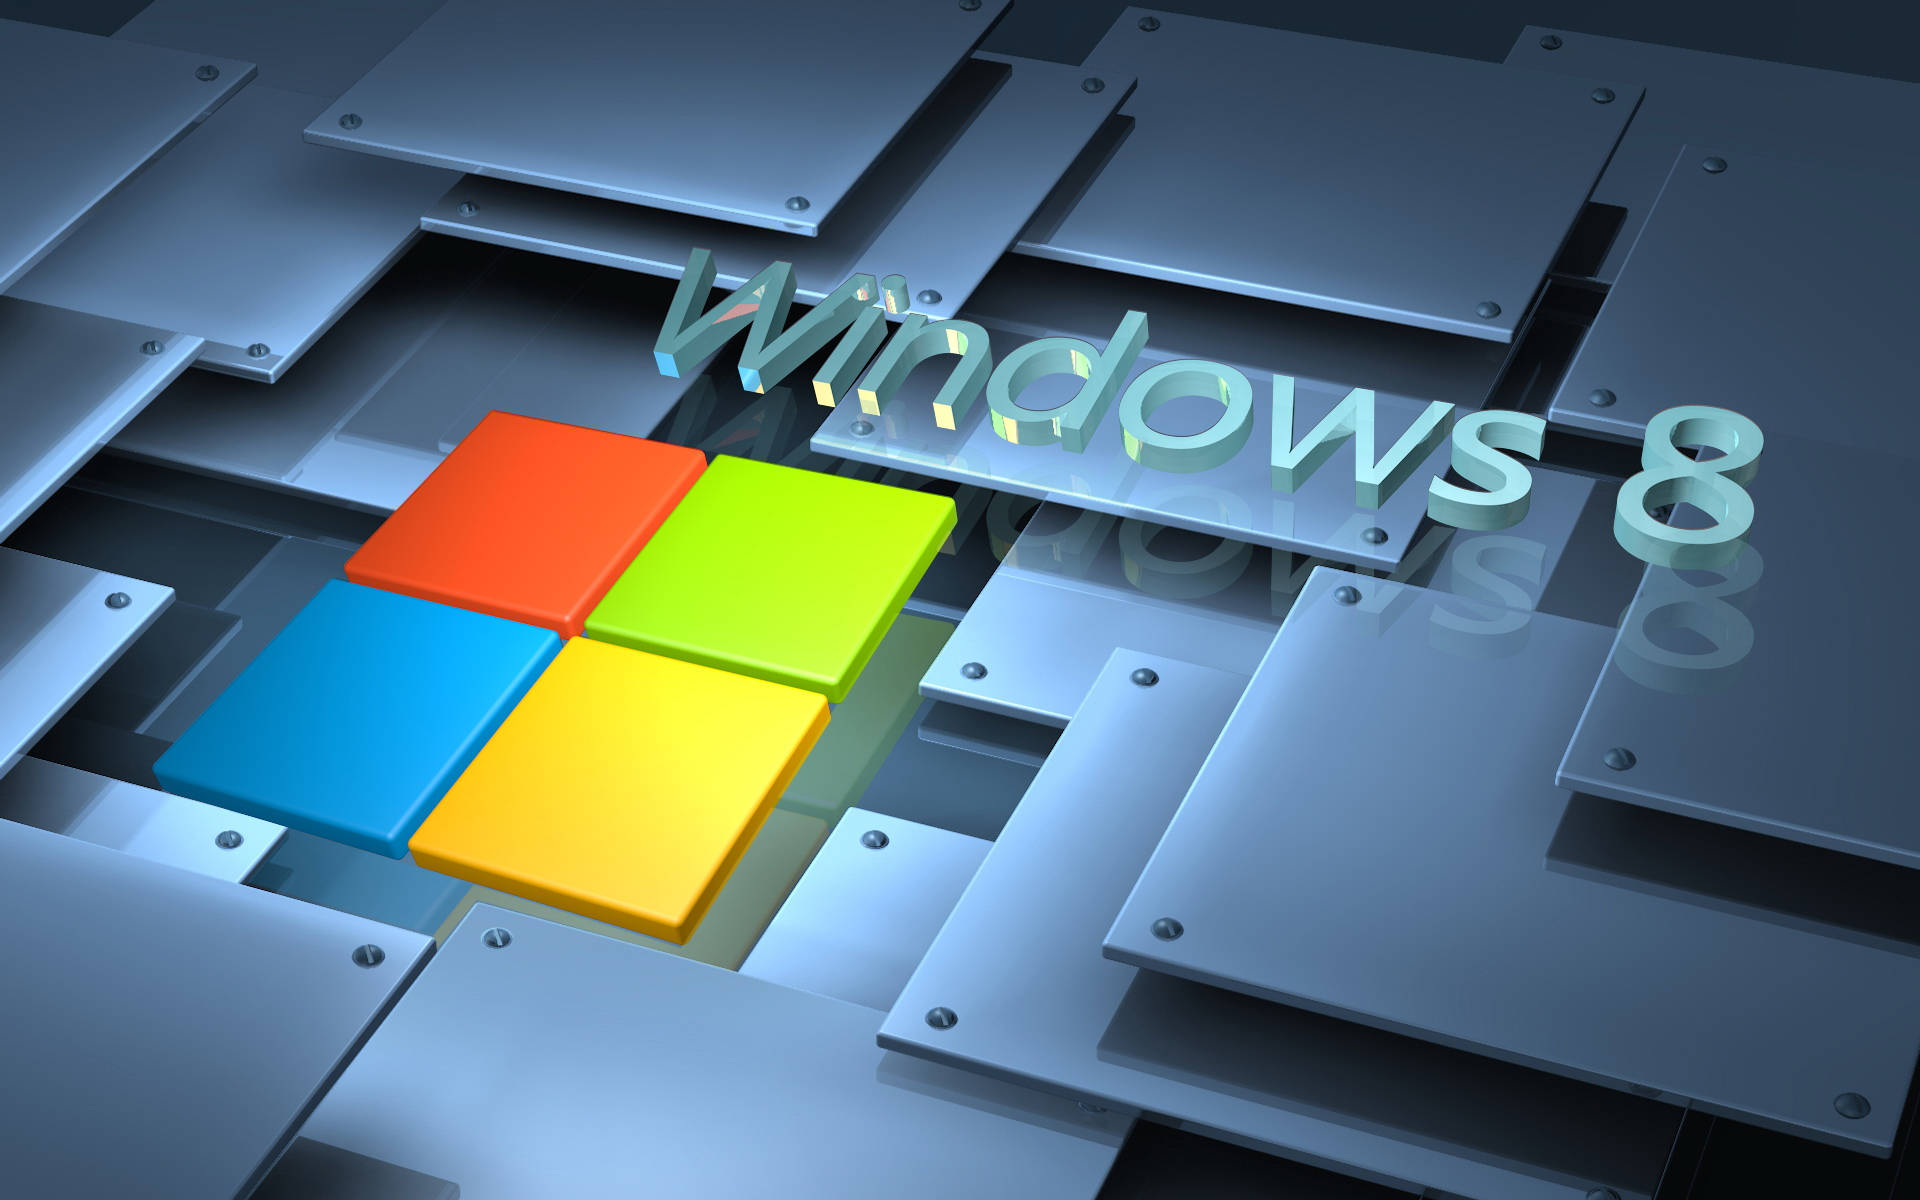 Windows 8 Background With Steel Tiles Wallpaper